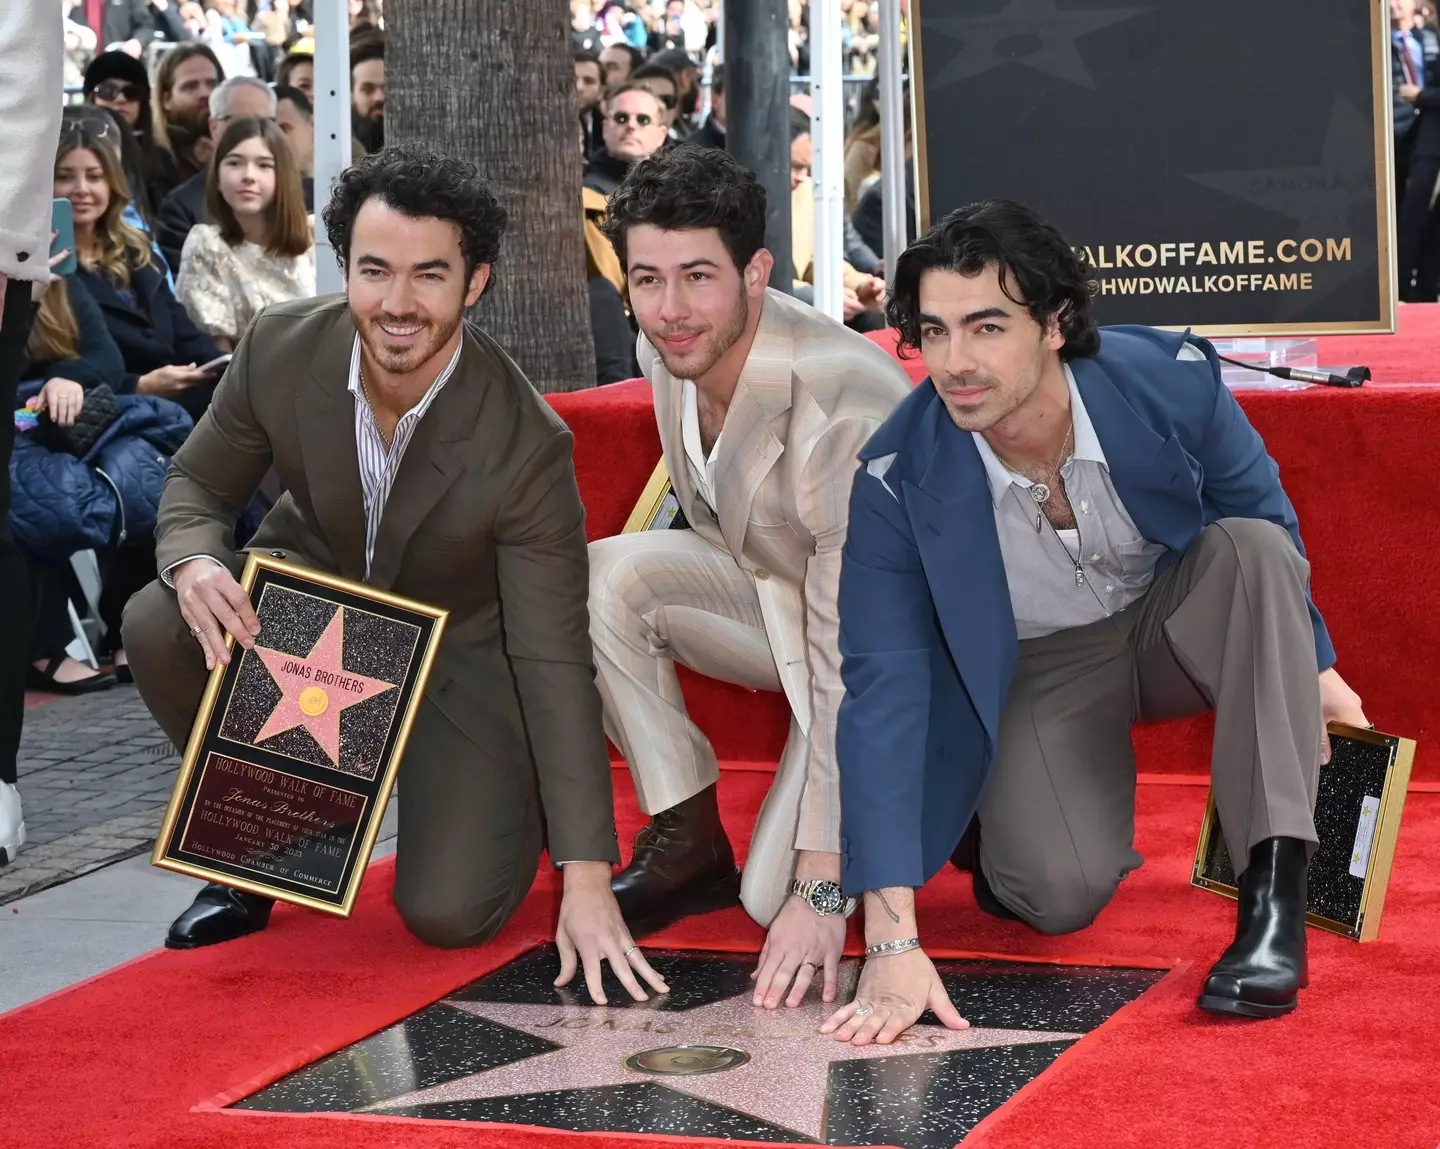 The Jonas Brothers received their star.